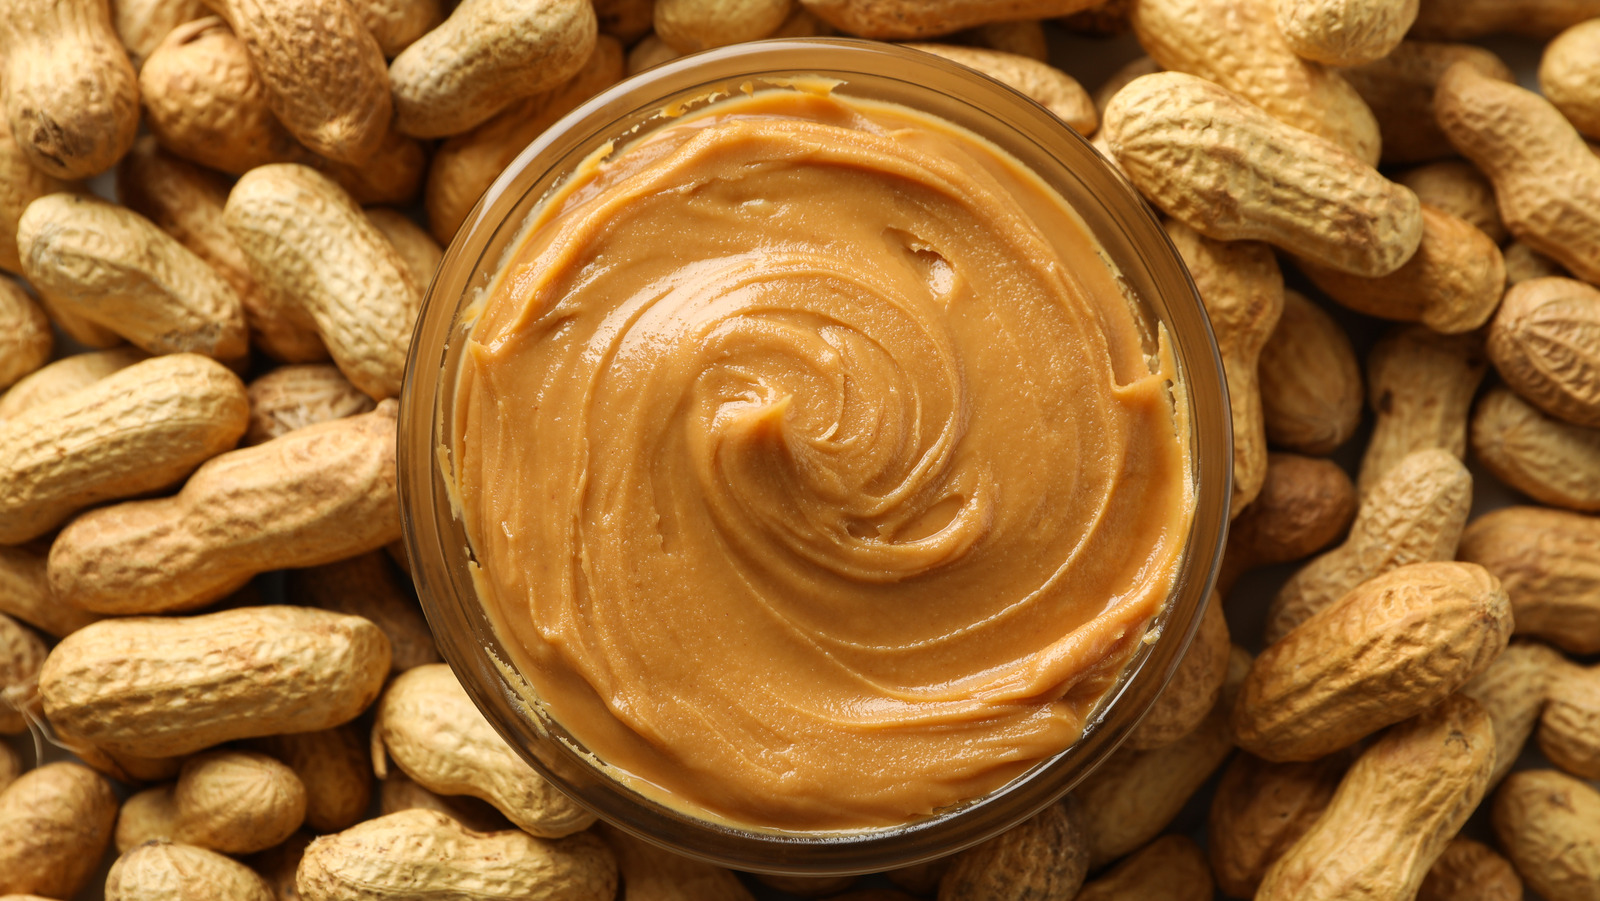 Why you shouldn’t eat peanut butter?